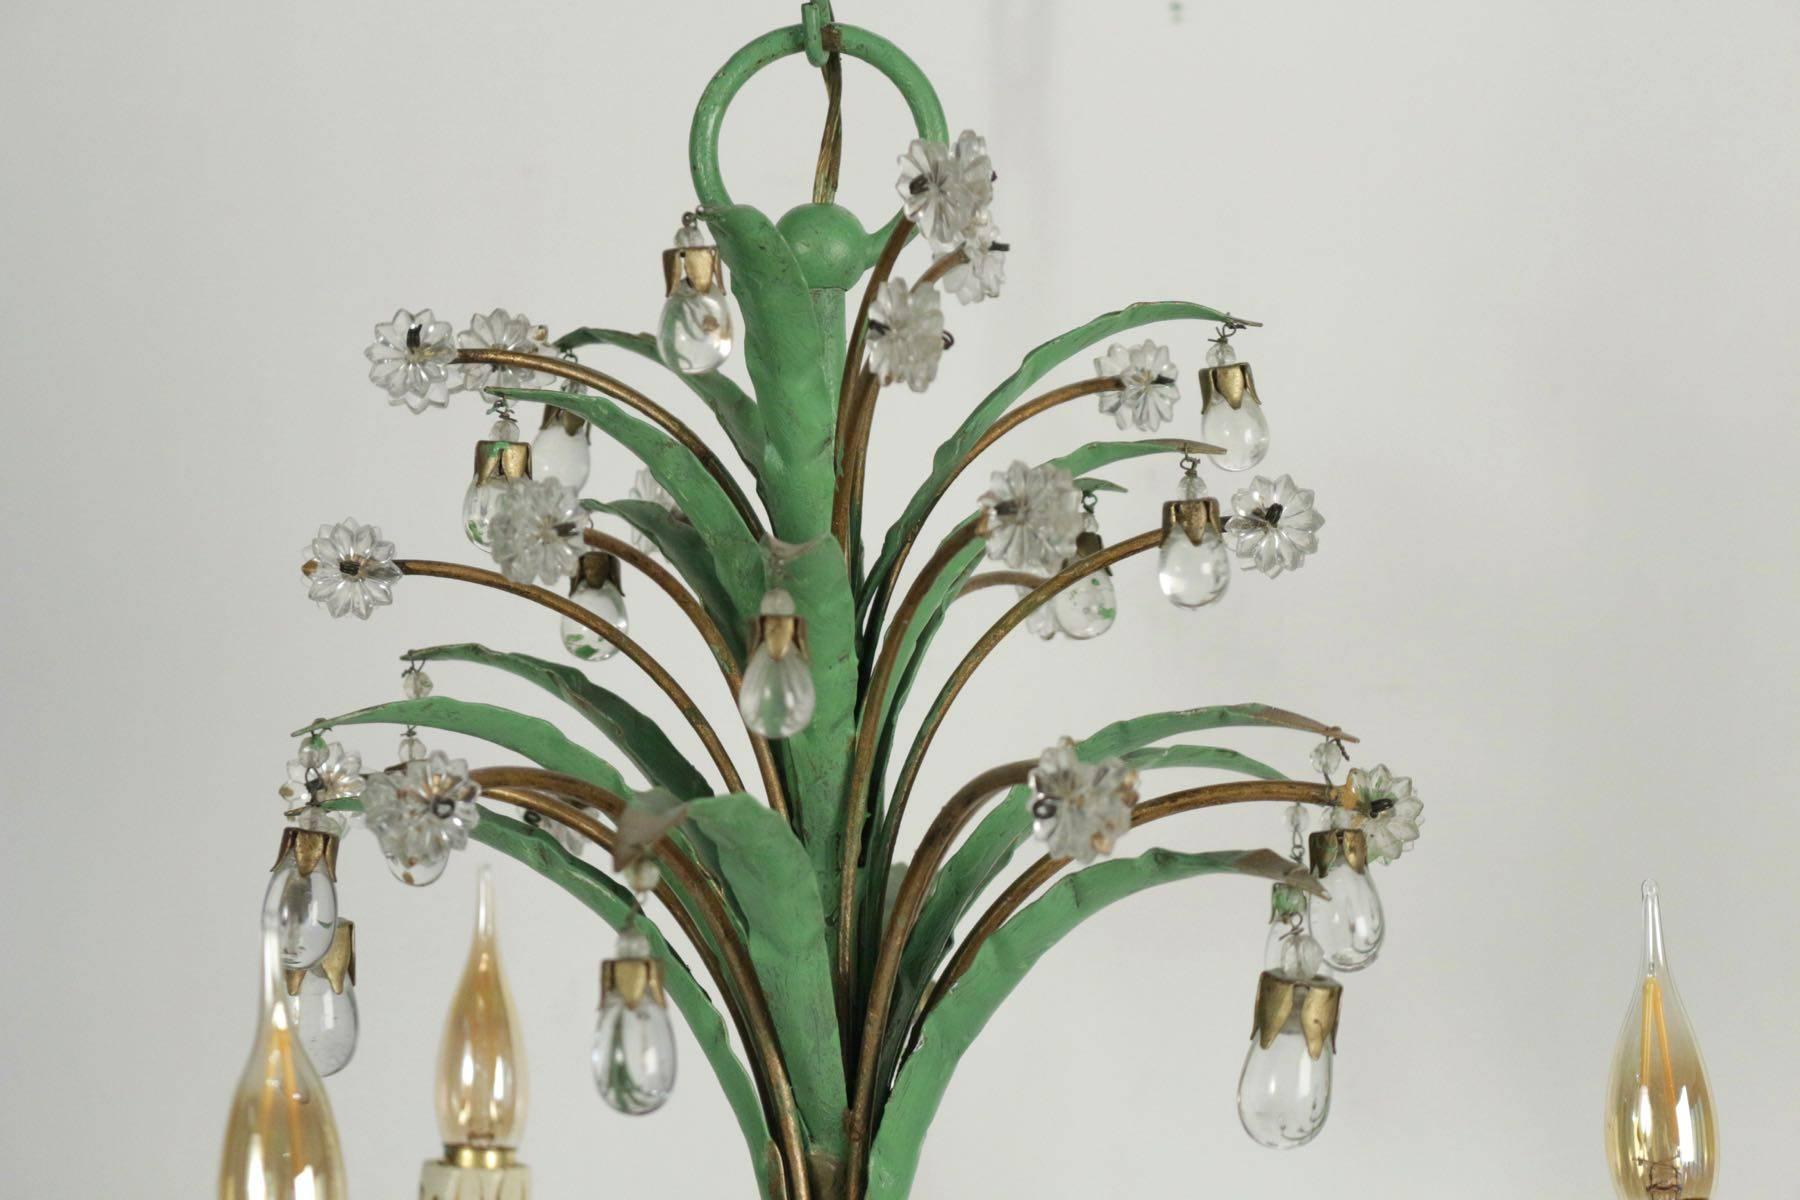 Three-arm chandelier in tole with crystals in glass, circa 1950 in green and gold.
     